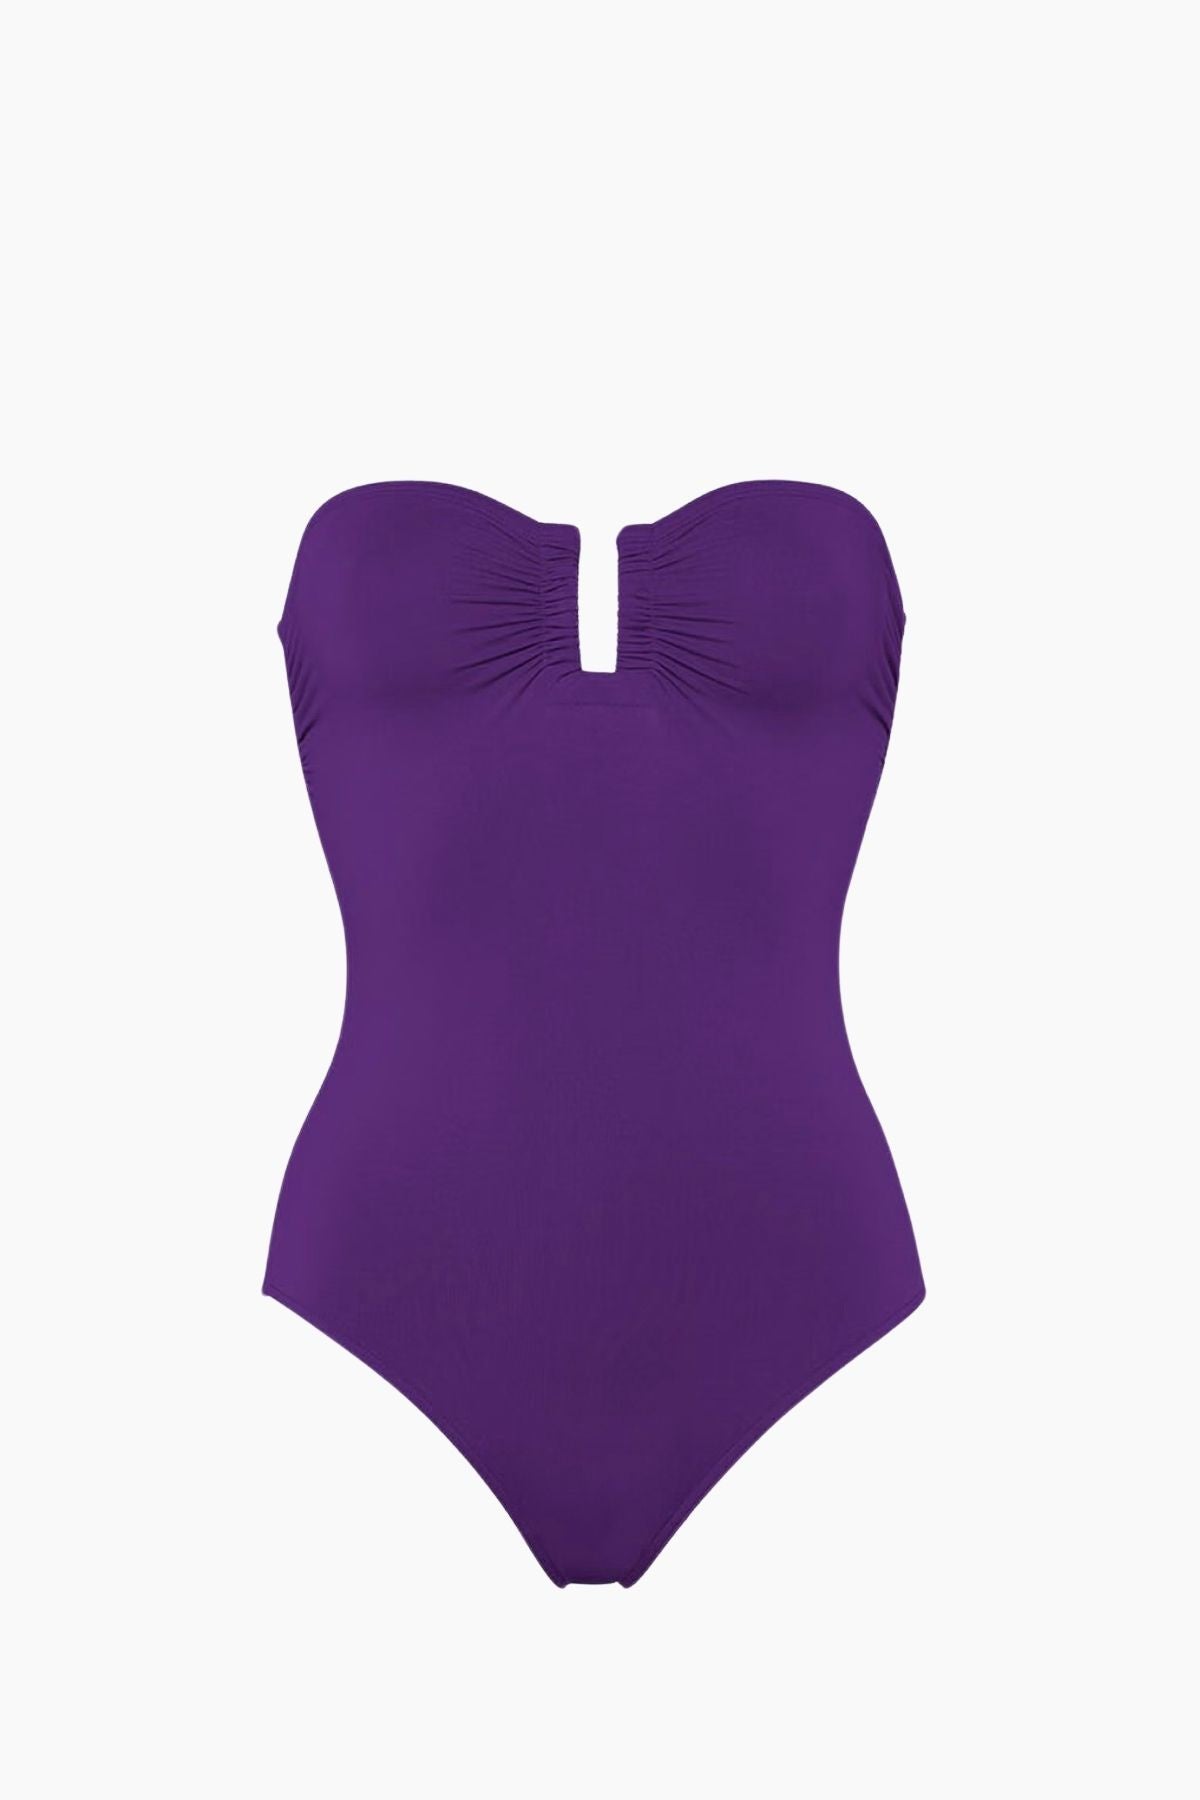 Eres Cassiopee Strapless One Piece Swimsuit - Inka Purple